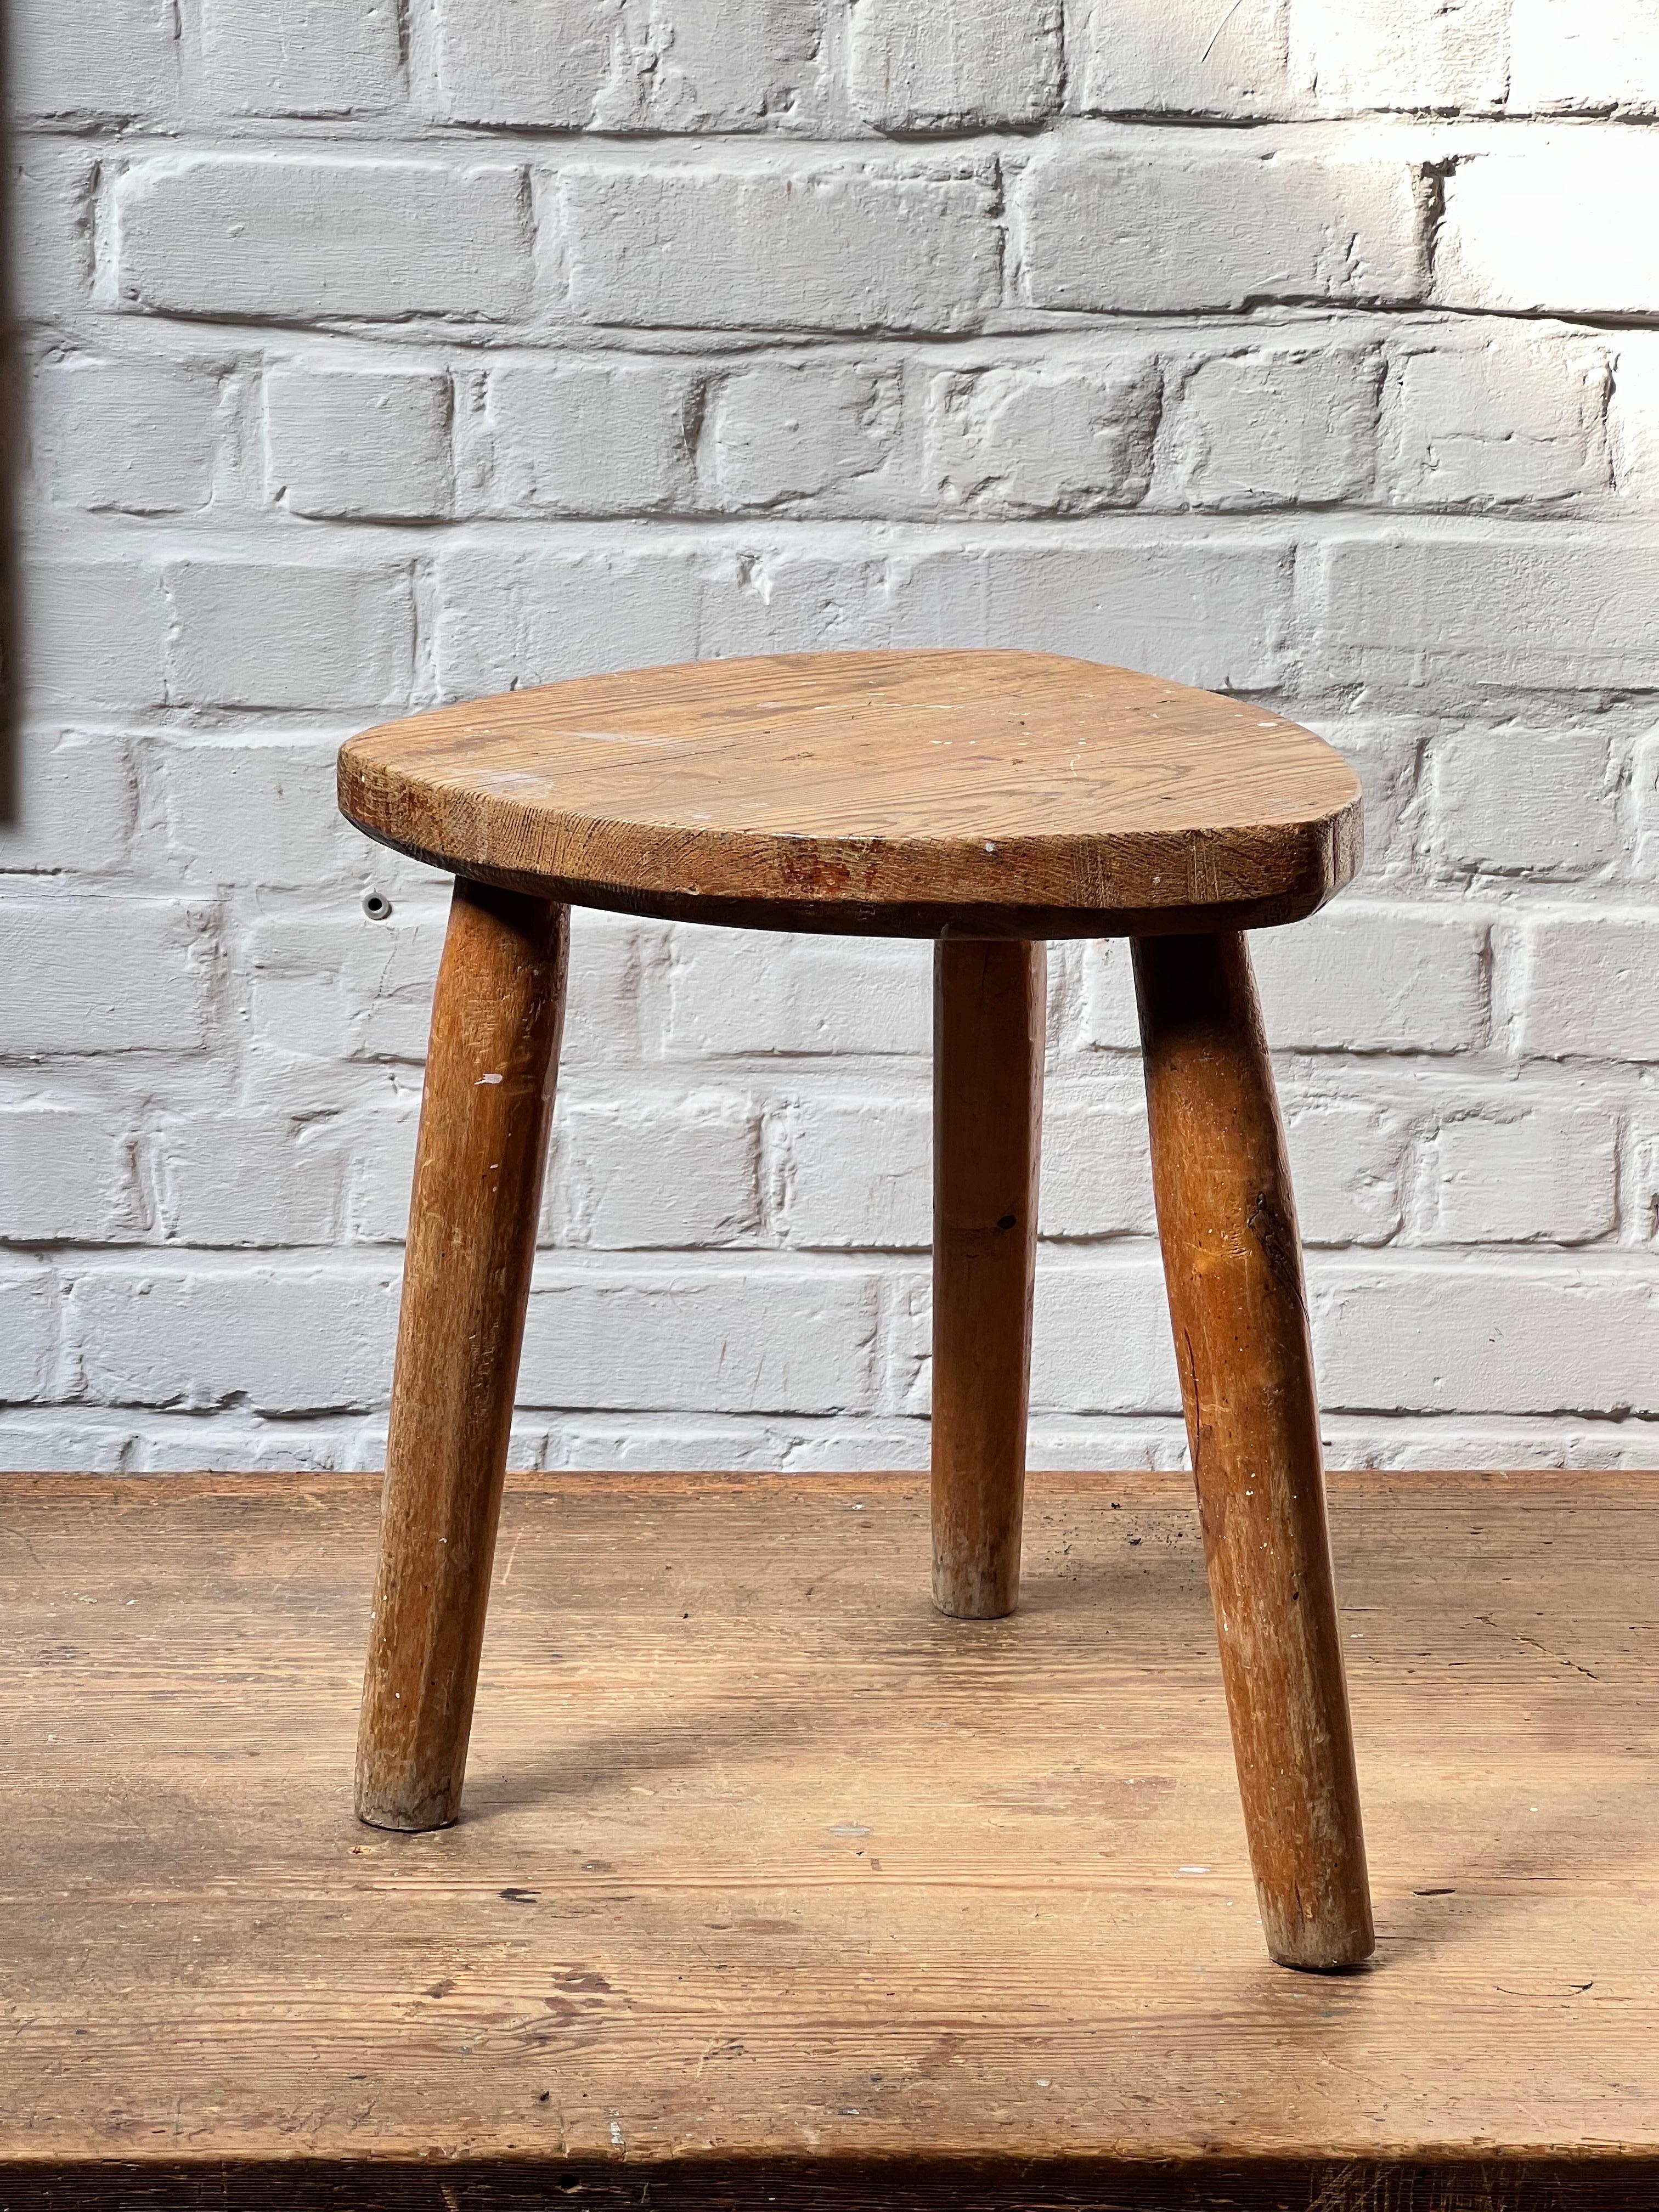 Very unique pine handmade massive slay of tree. It is a free form shape. The top is patinated and shows various shades of brown/brownish colors and honey tones. Elegant and brutalist describe that stool properly. Very strong stool. Lovely used as a